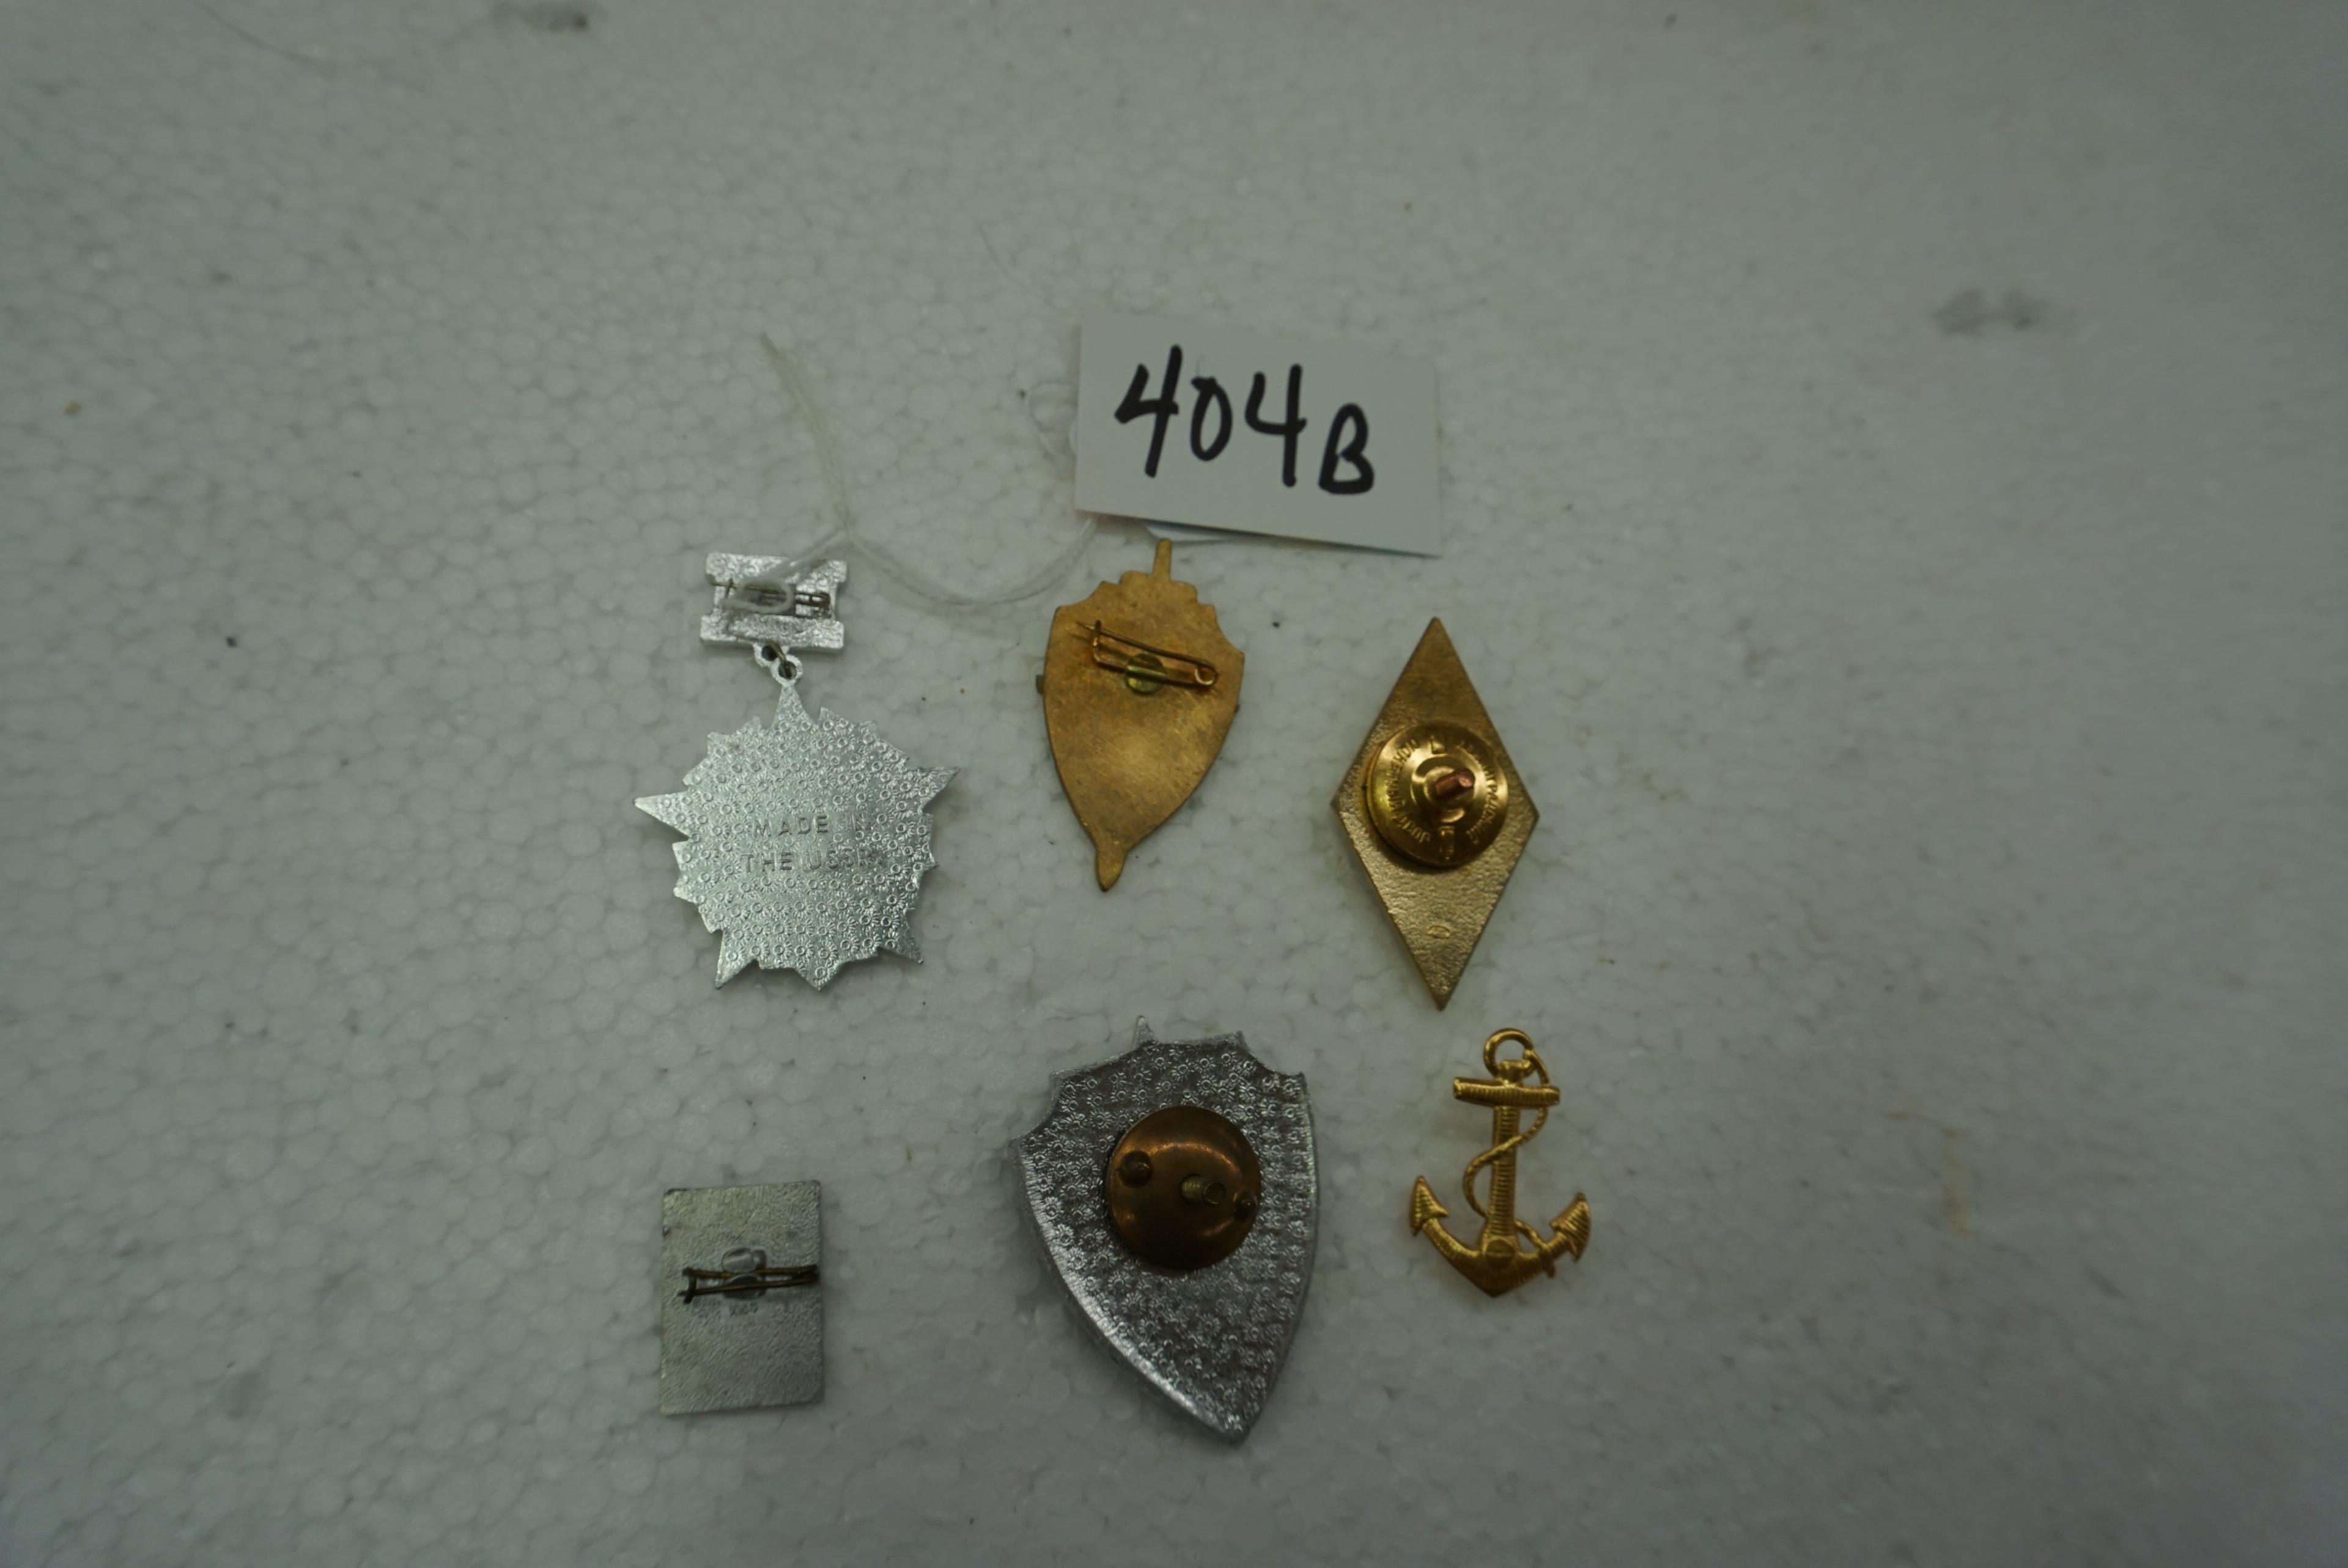 Six (6) Soviet Cold War Pins, Medals and Badges, All One Money. Estate Find incl. KGB Pin Back,